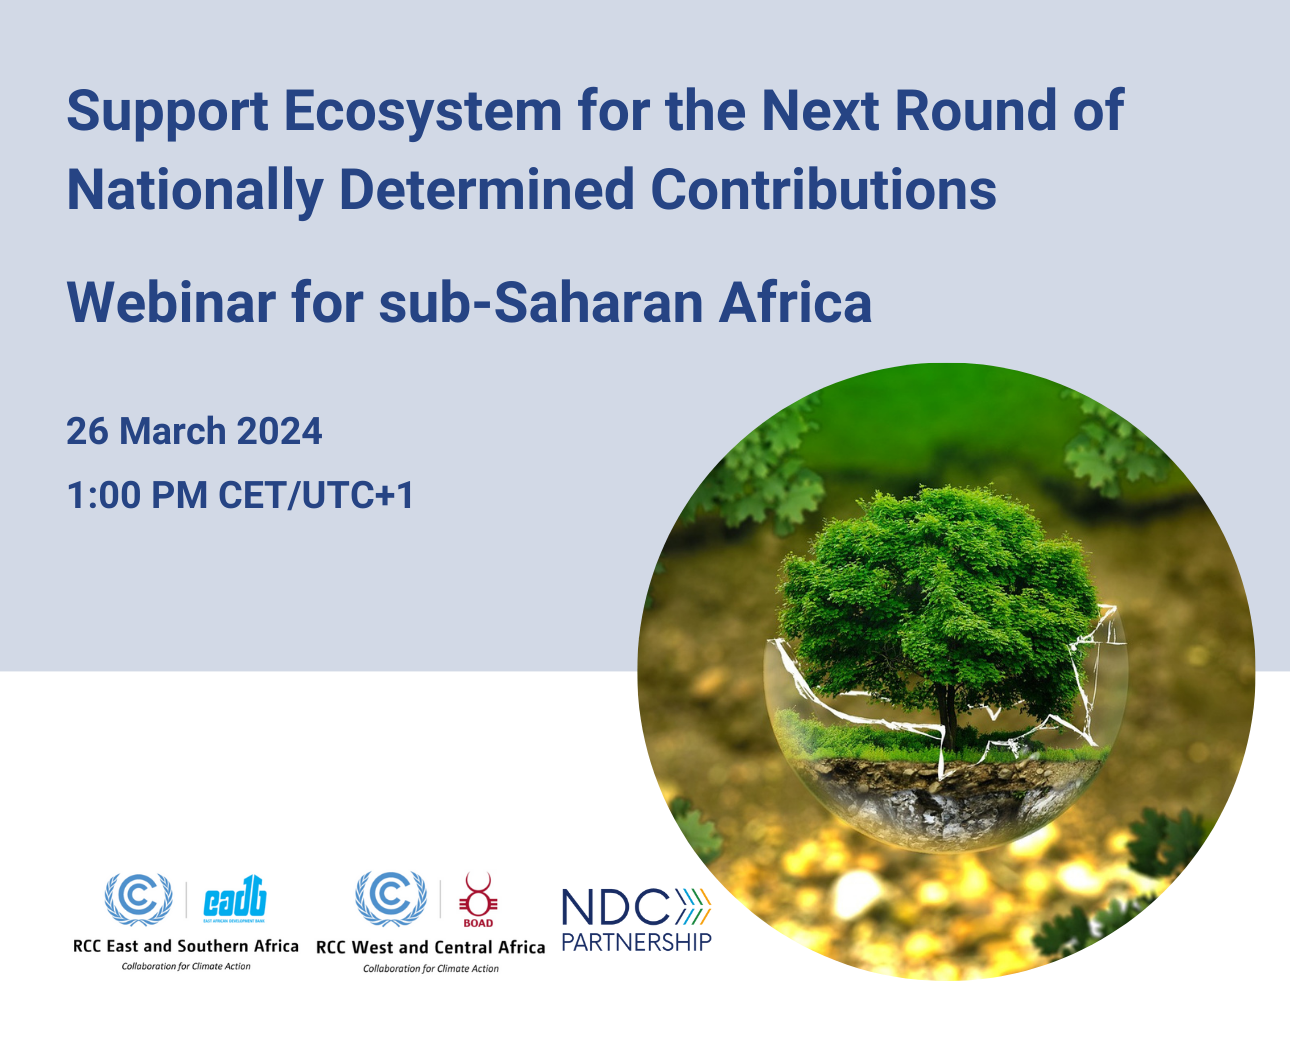 RCC West and Central Africa and RCC East and Southern Africa: NDCs Webinar for Africa region